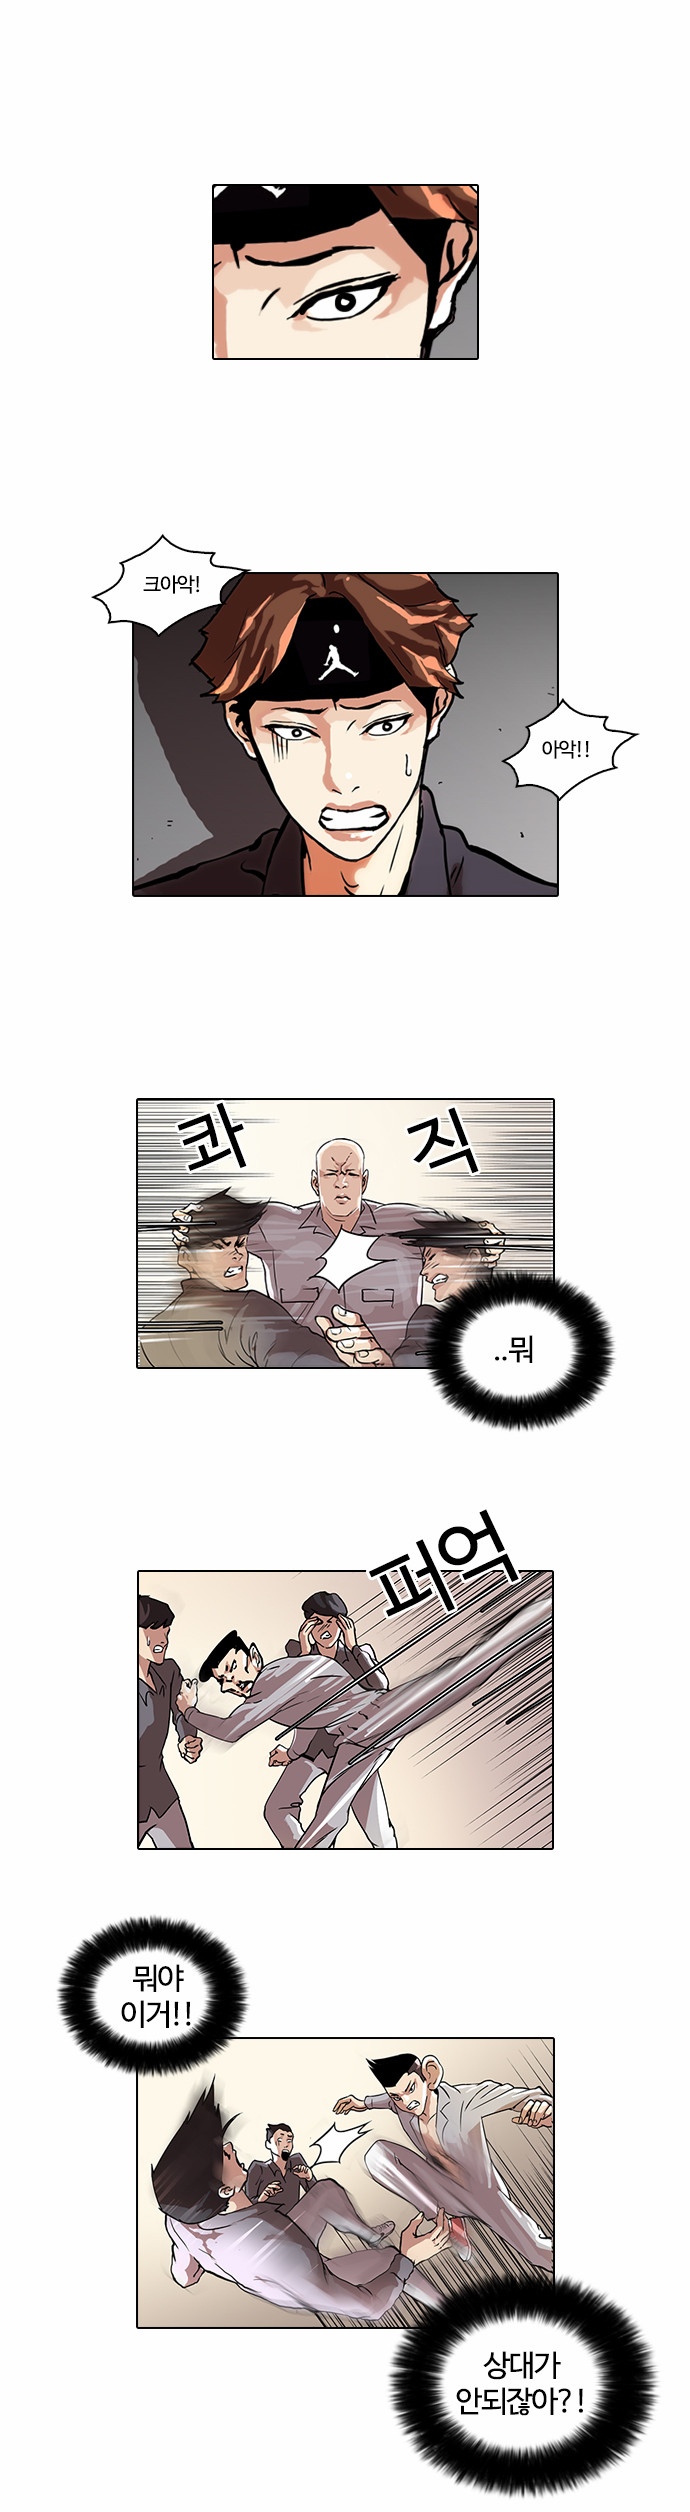 Lookism - Chapter 38 - Page 1